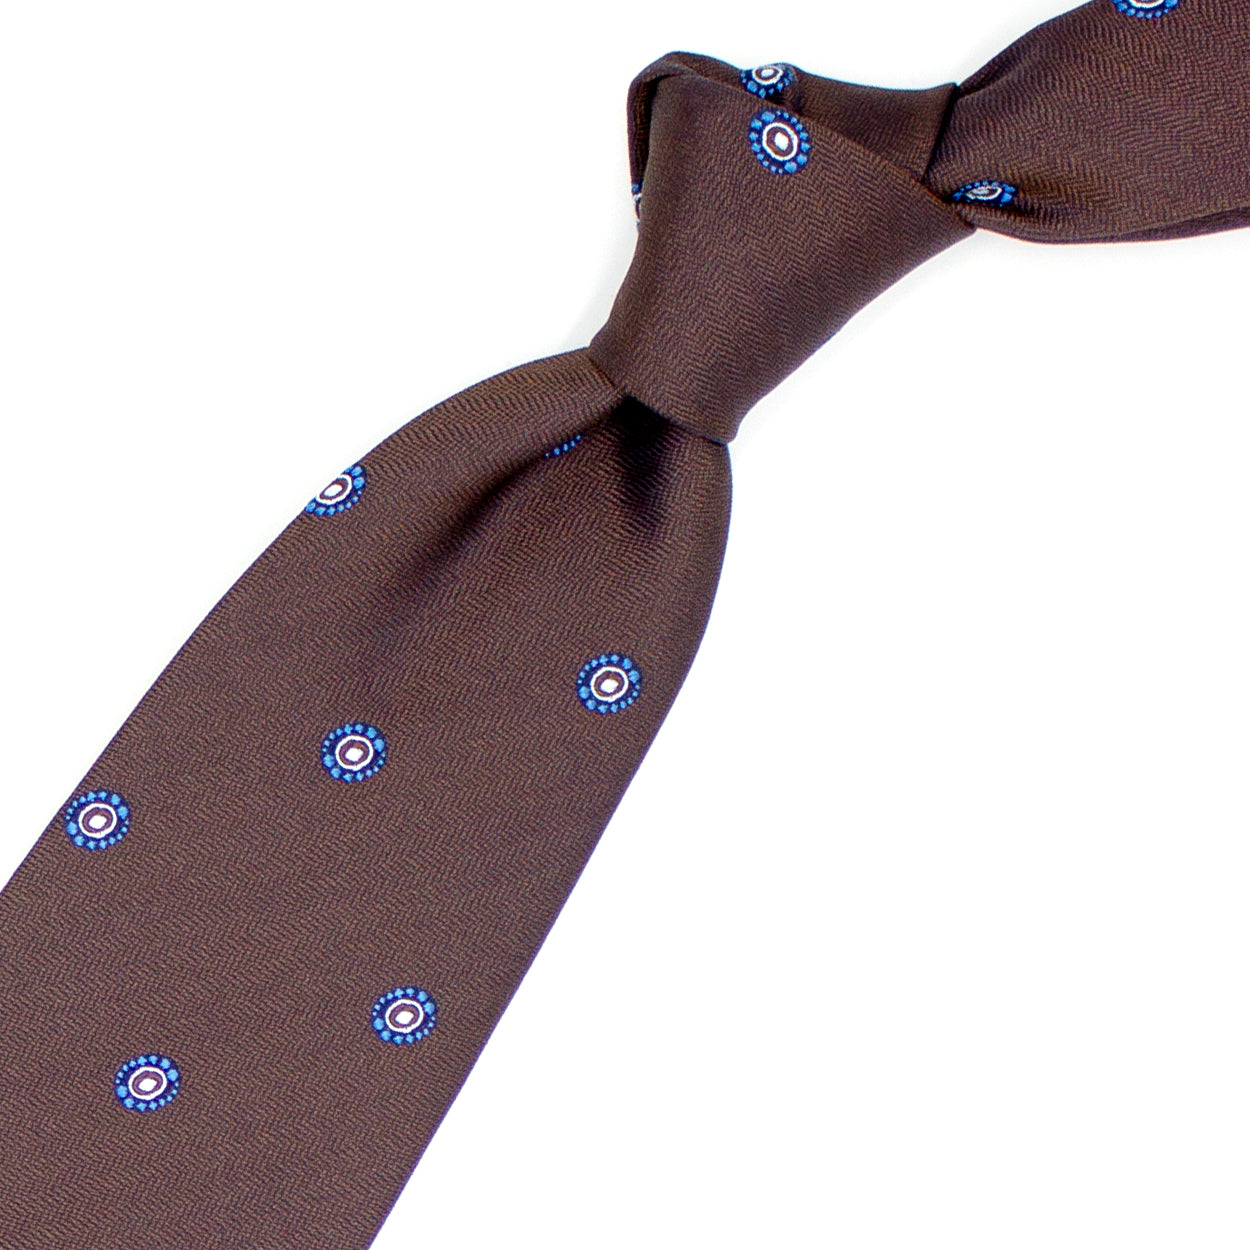 Brown tie with blue and white design